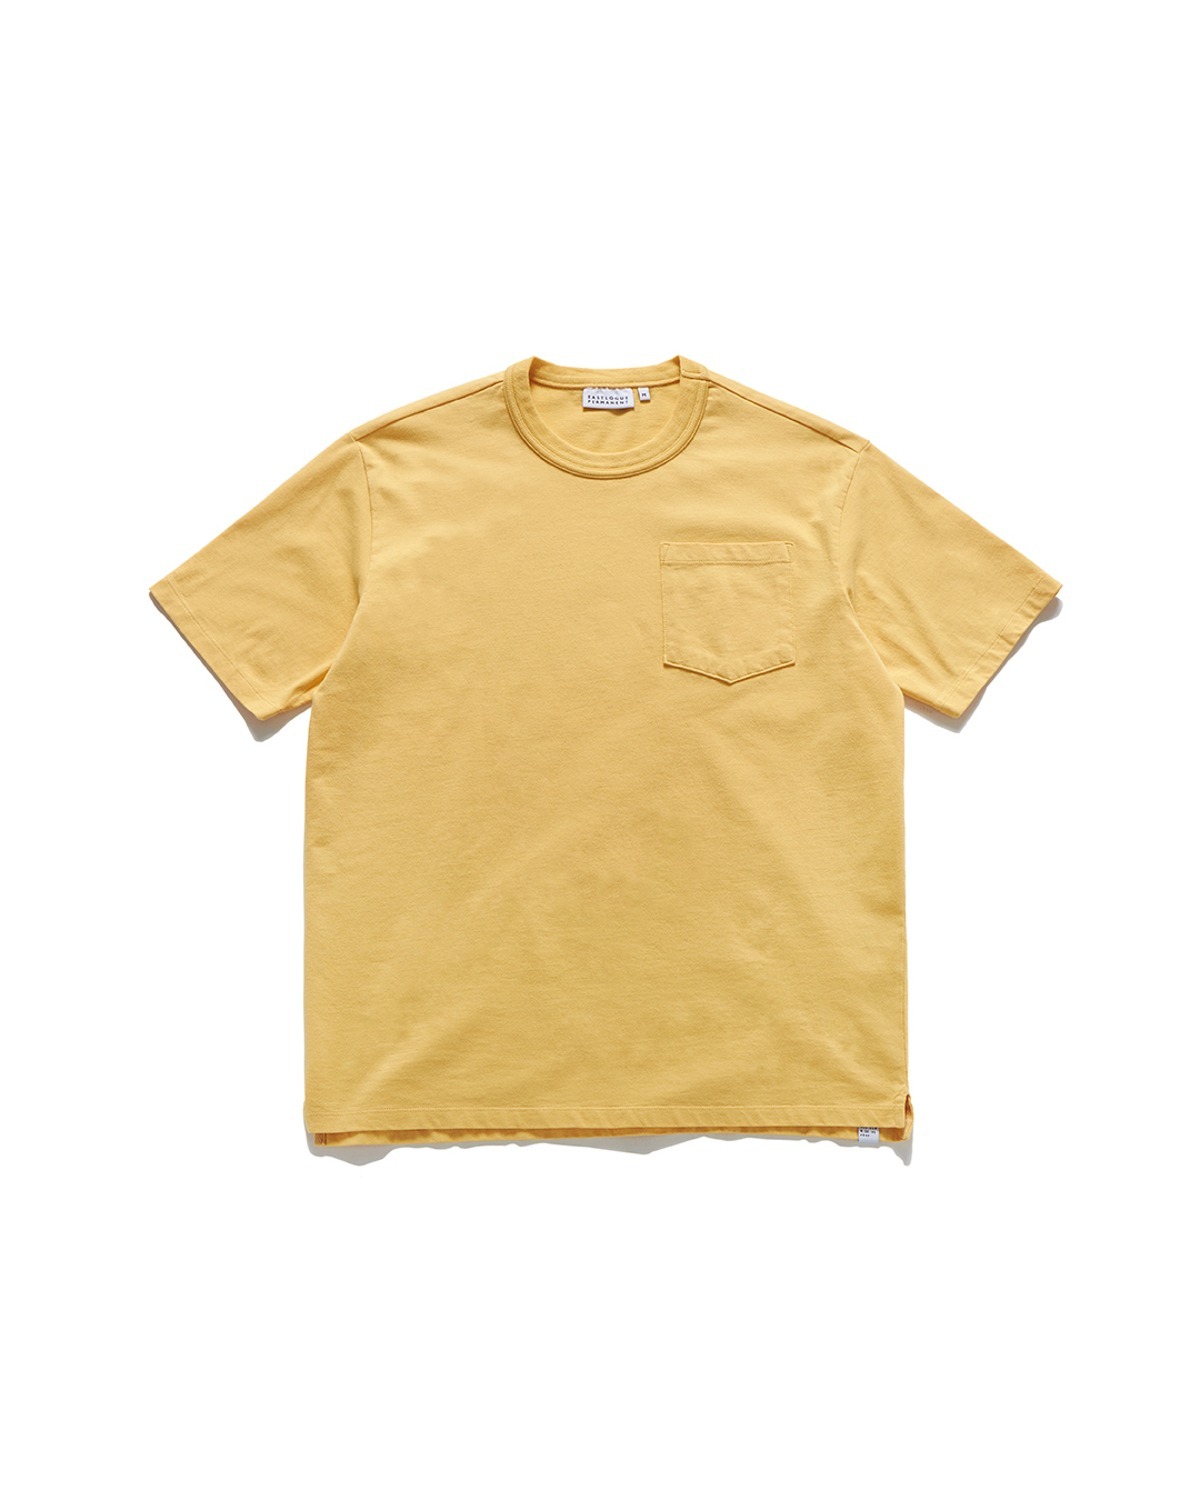 ONE POCKET T-SHIRT (new ver.) / YELLOW